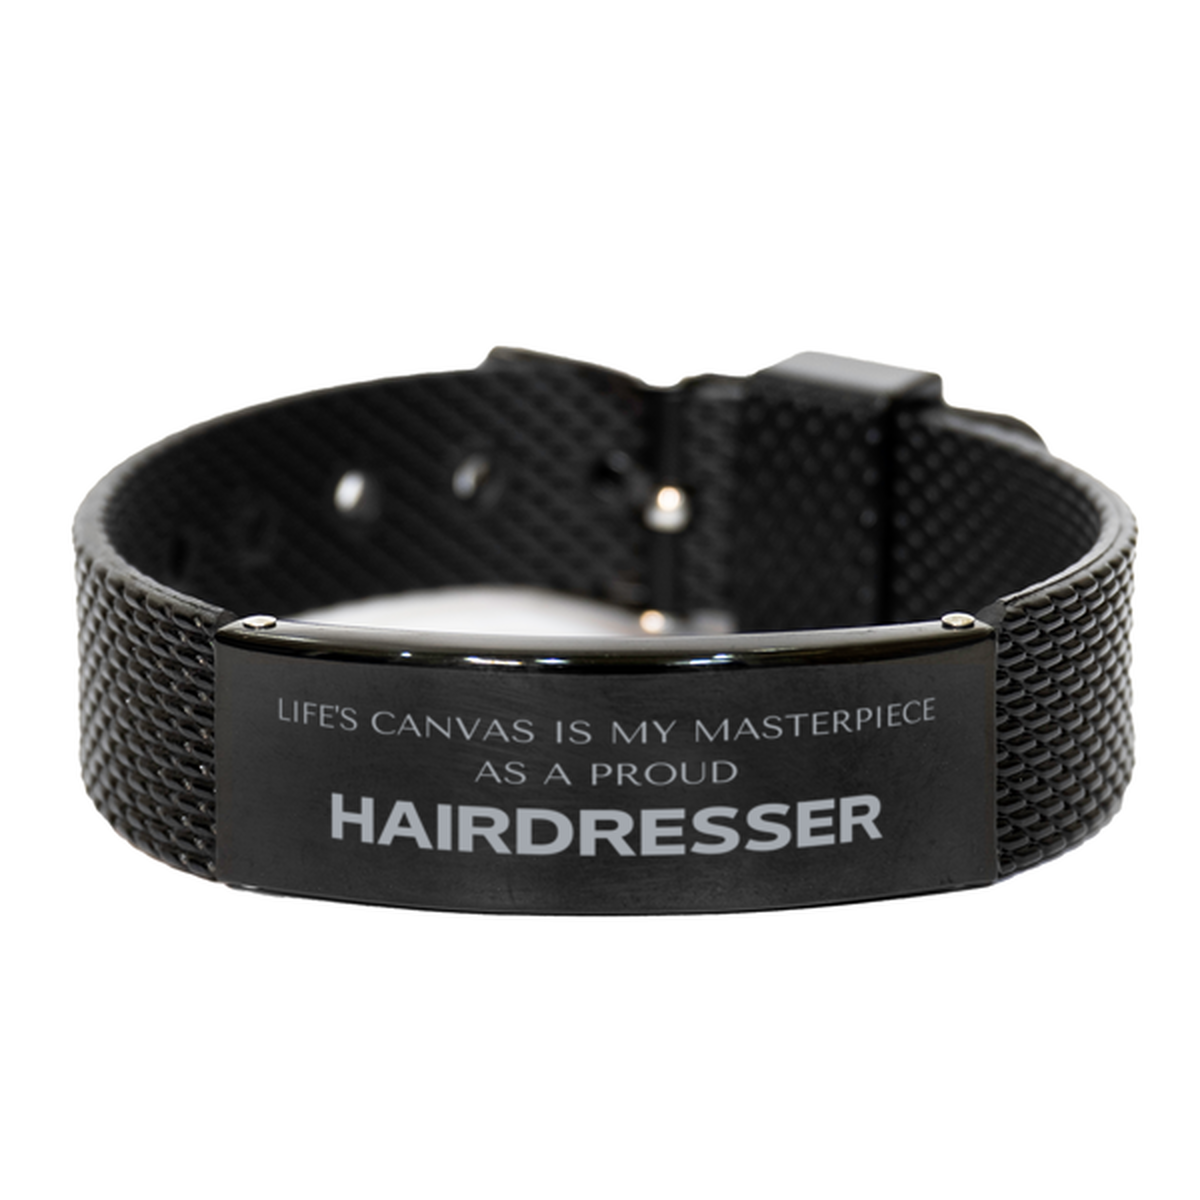 Proud Hairdresser Gifts, Life's canvas is my masterpiece, Epic Birthday Christmas Unique Black Shark Mesh Bracelet For Hairdresser, Coworkers, Men, Women, Friends